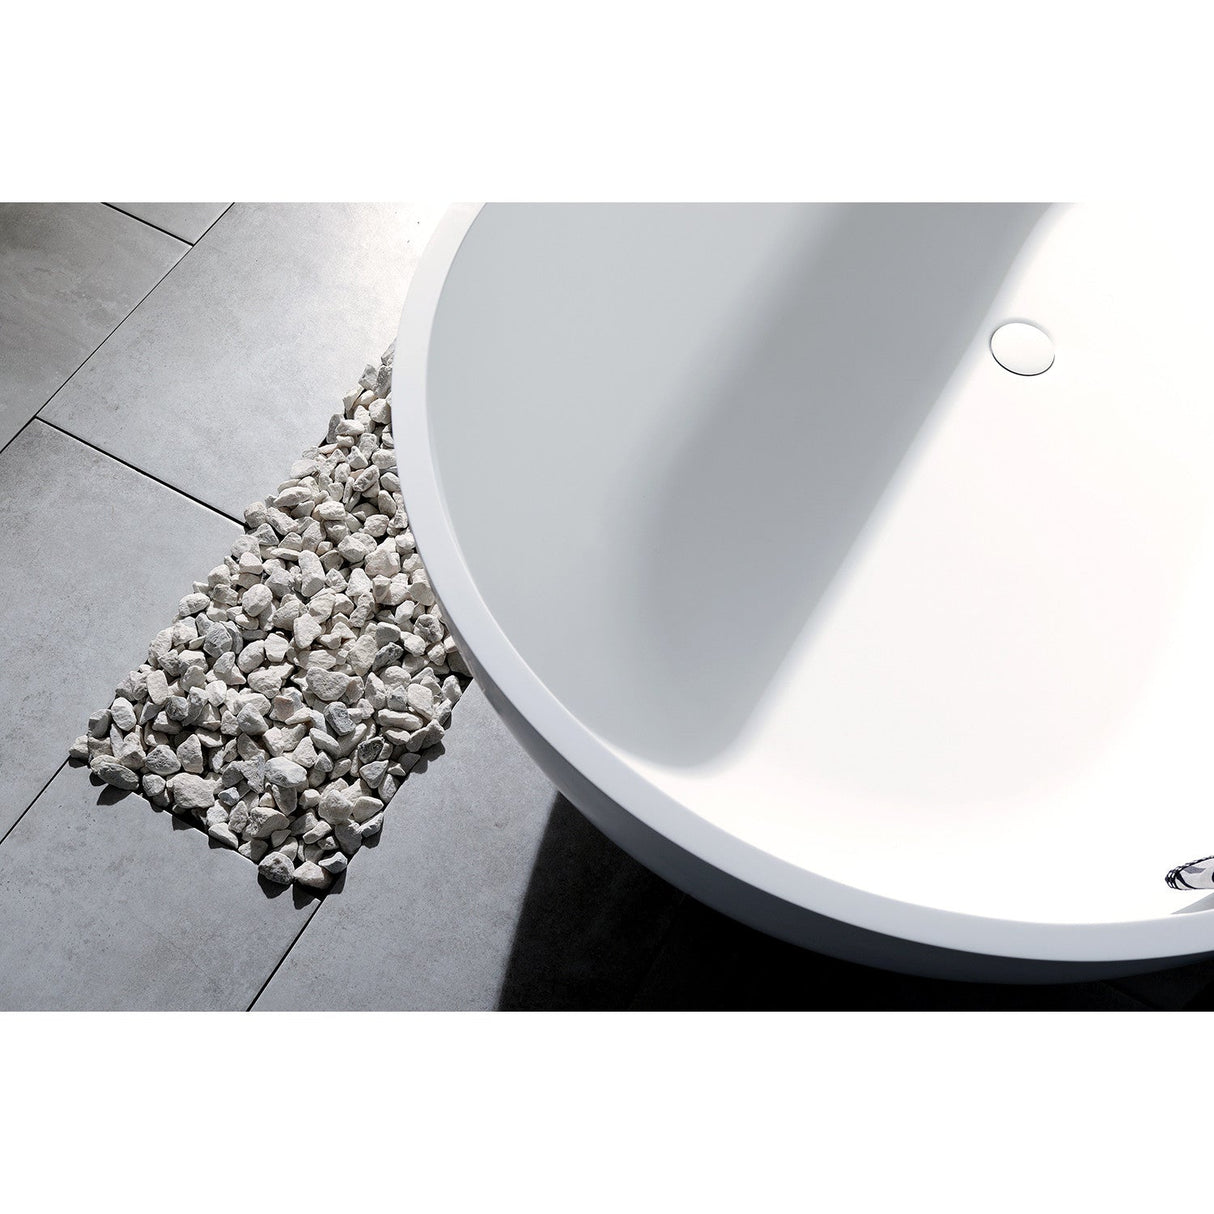 Arcticstone VRTRS703520 70-Inch Solid Surface White Stone Freestanding Tub with Drain, Matte White